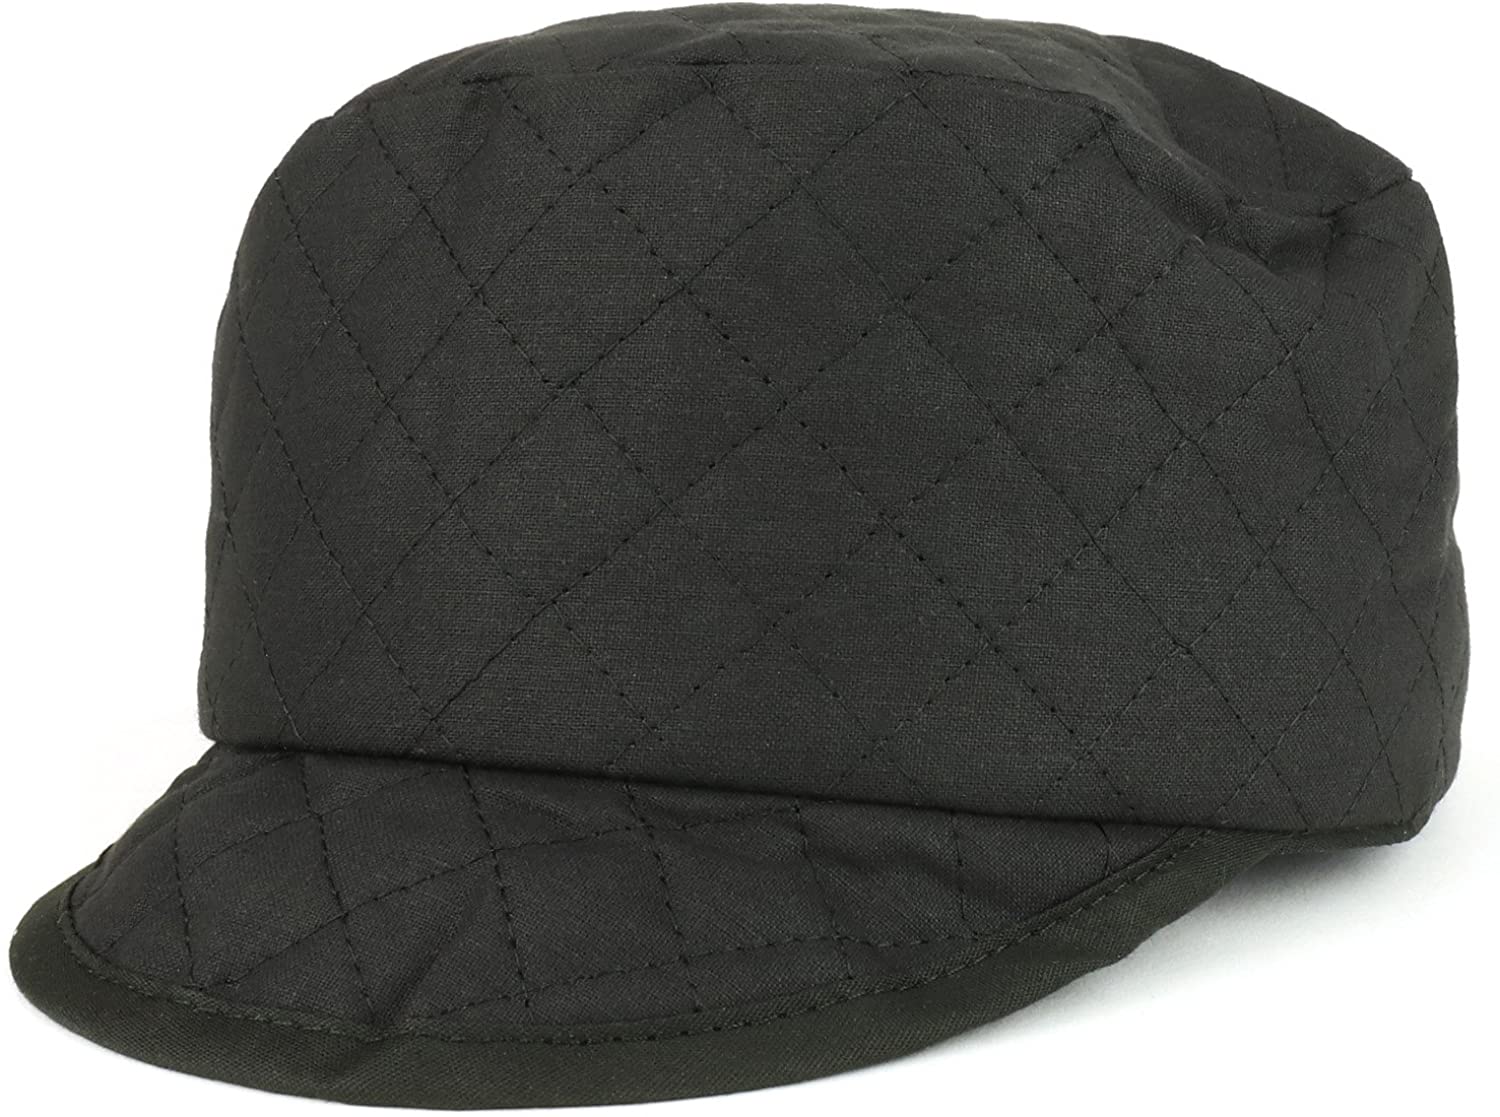 Armycrew Made in USA Tuff Quilted Black Stitching Cotton Soft Welders Cap